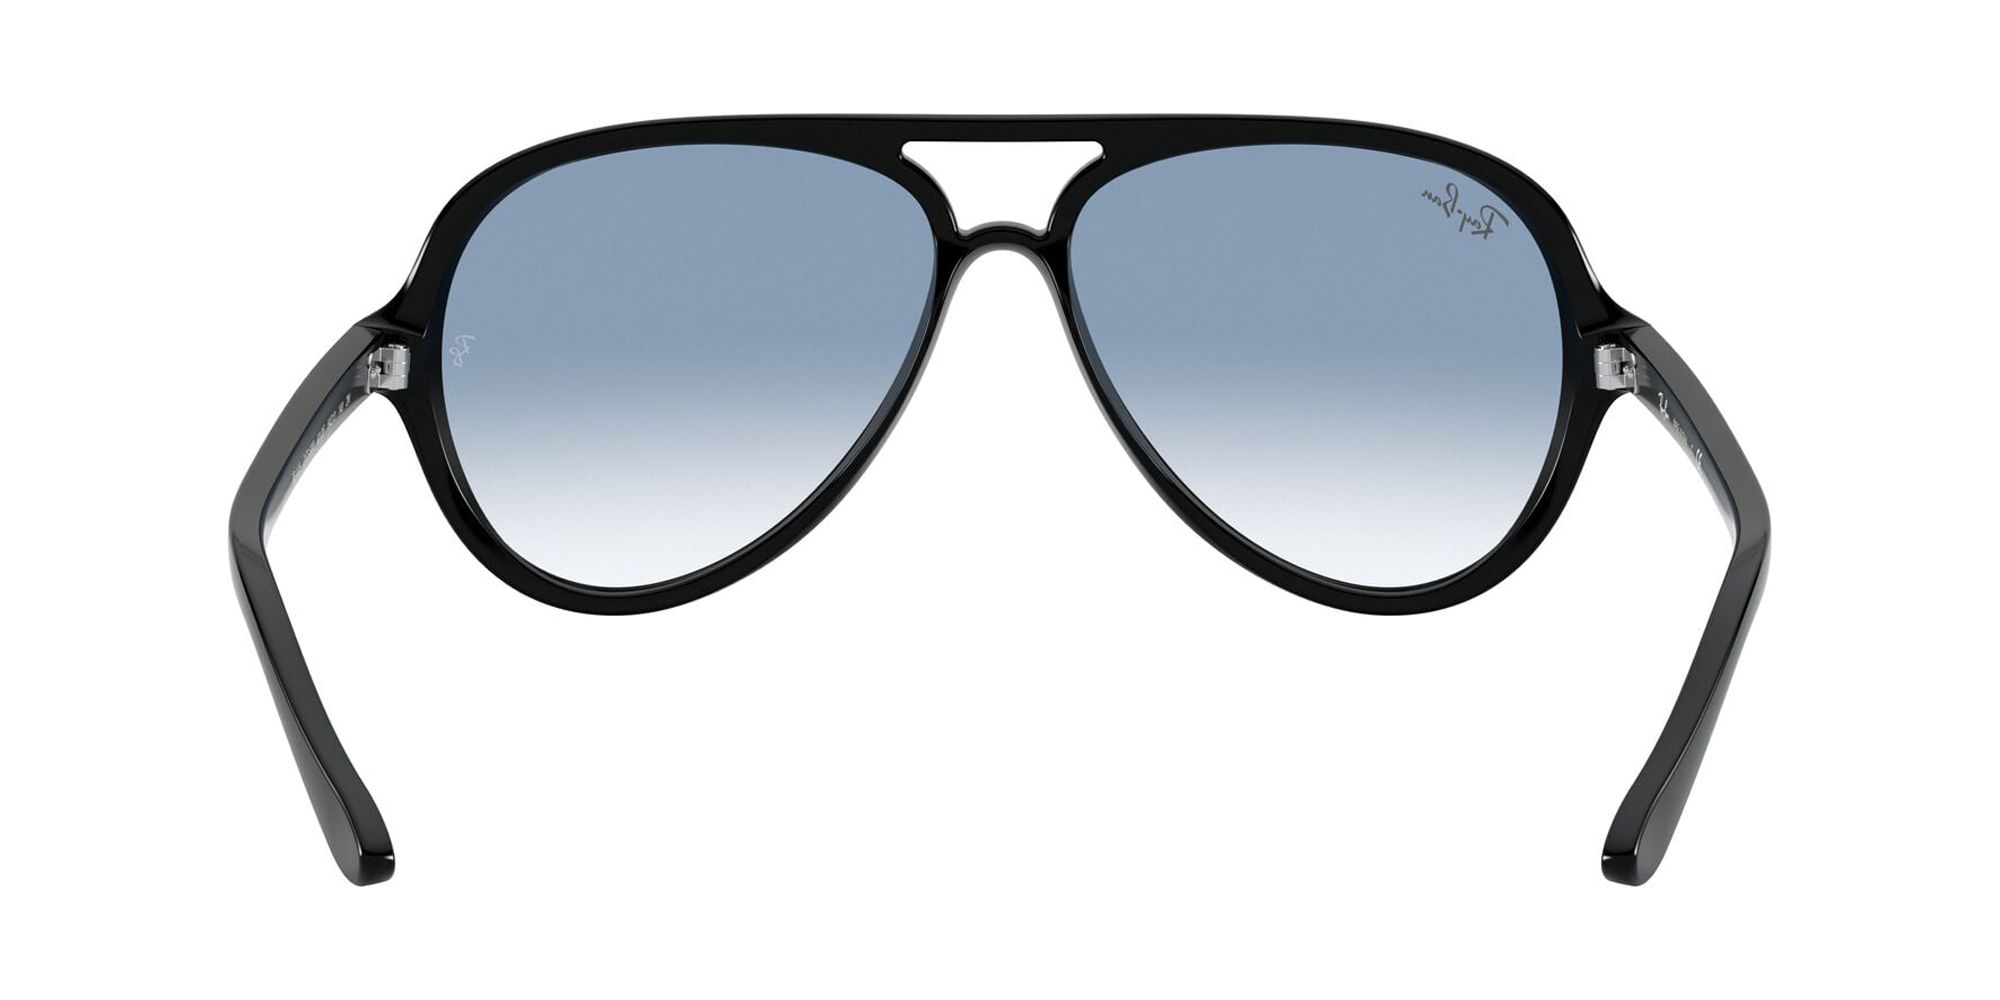 Ray-Ban RB4125 Cats 5000 Sunglasses - image 7 of 12